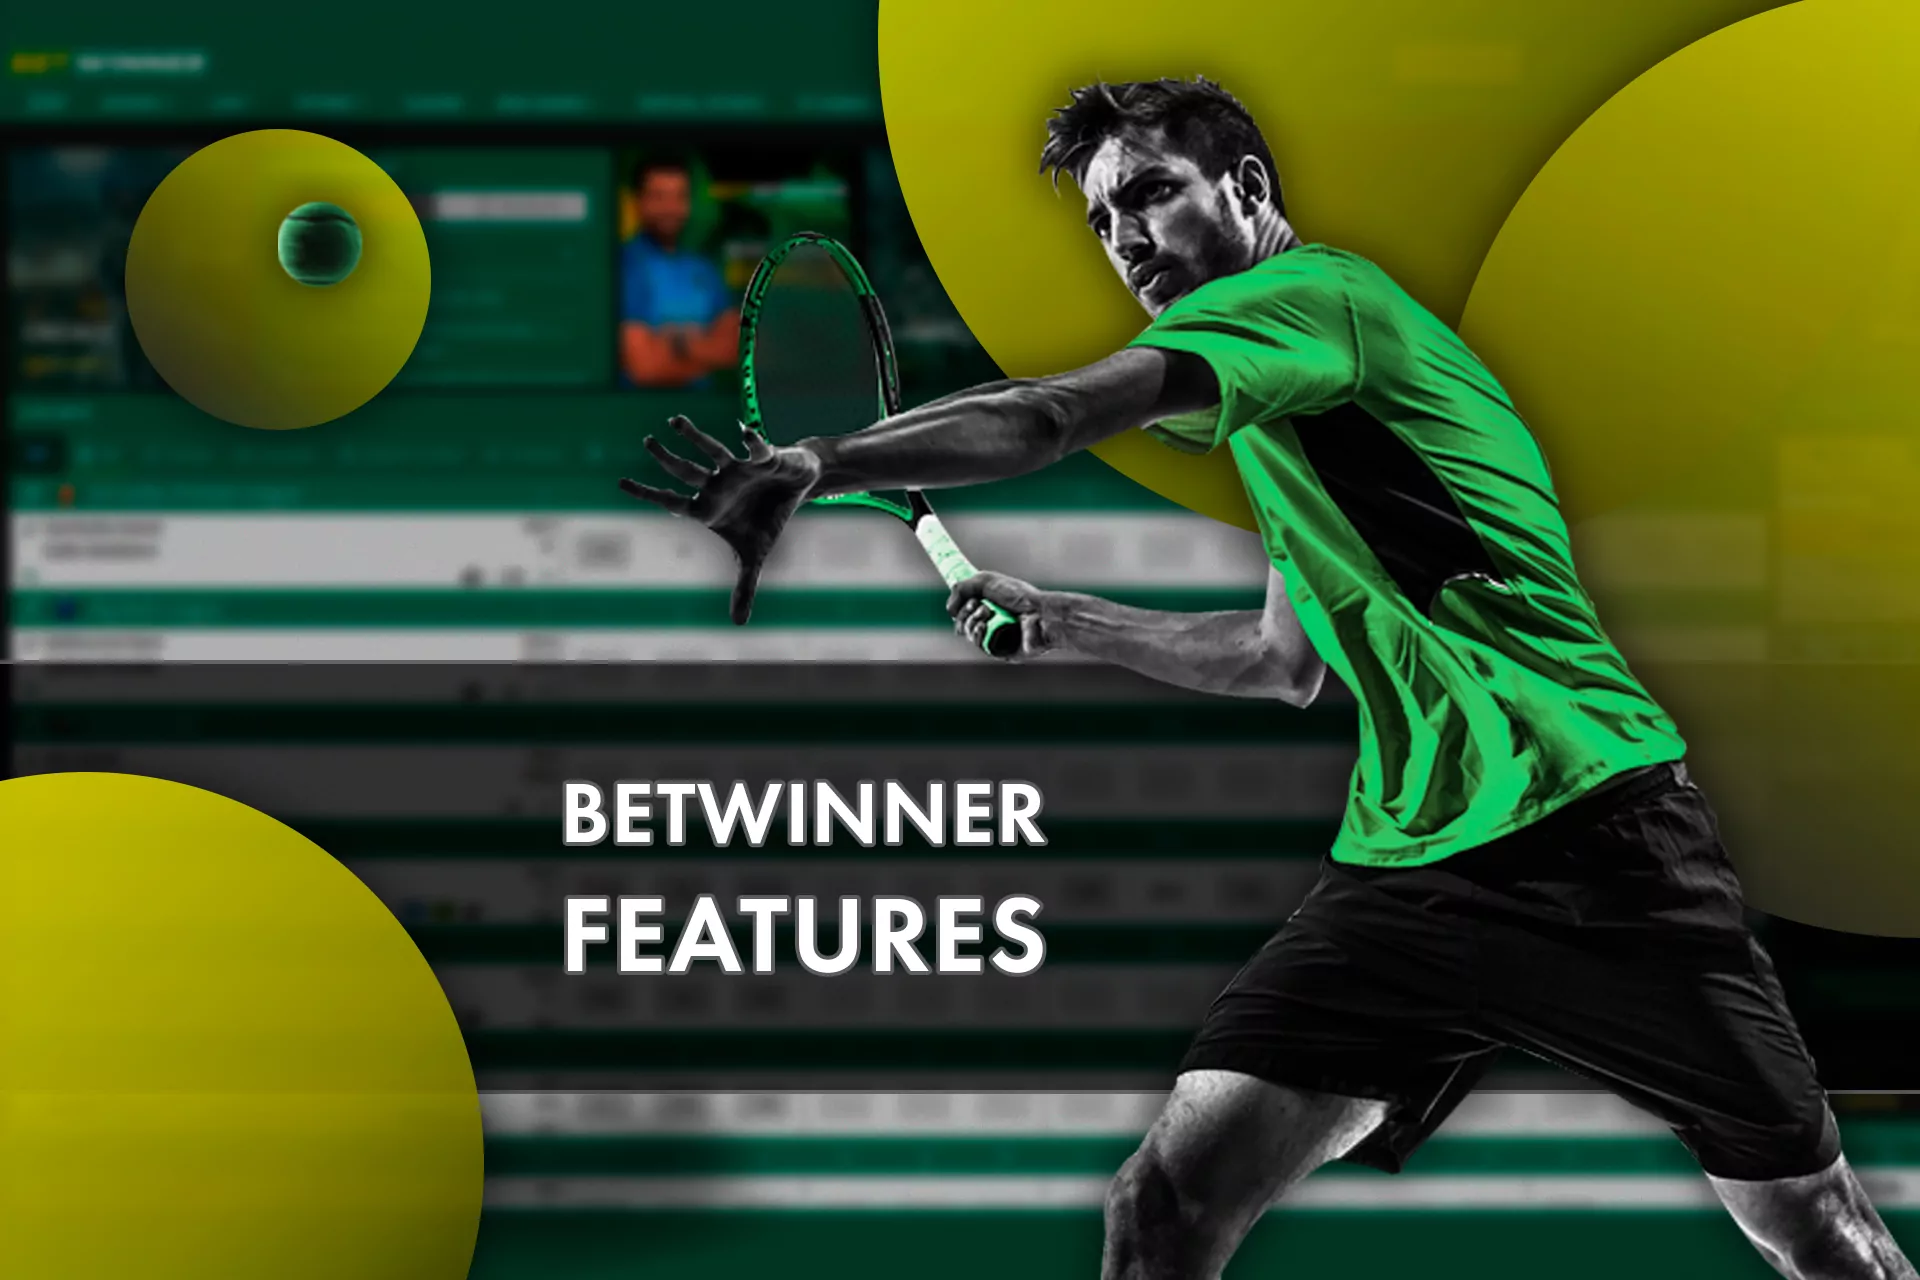 At BetWinner you can place bets watching live streaming of sports or cybersports matches.